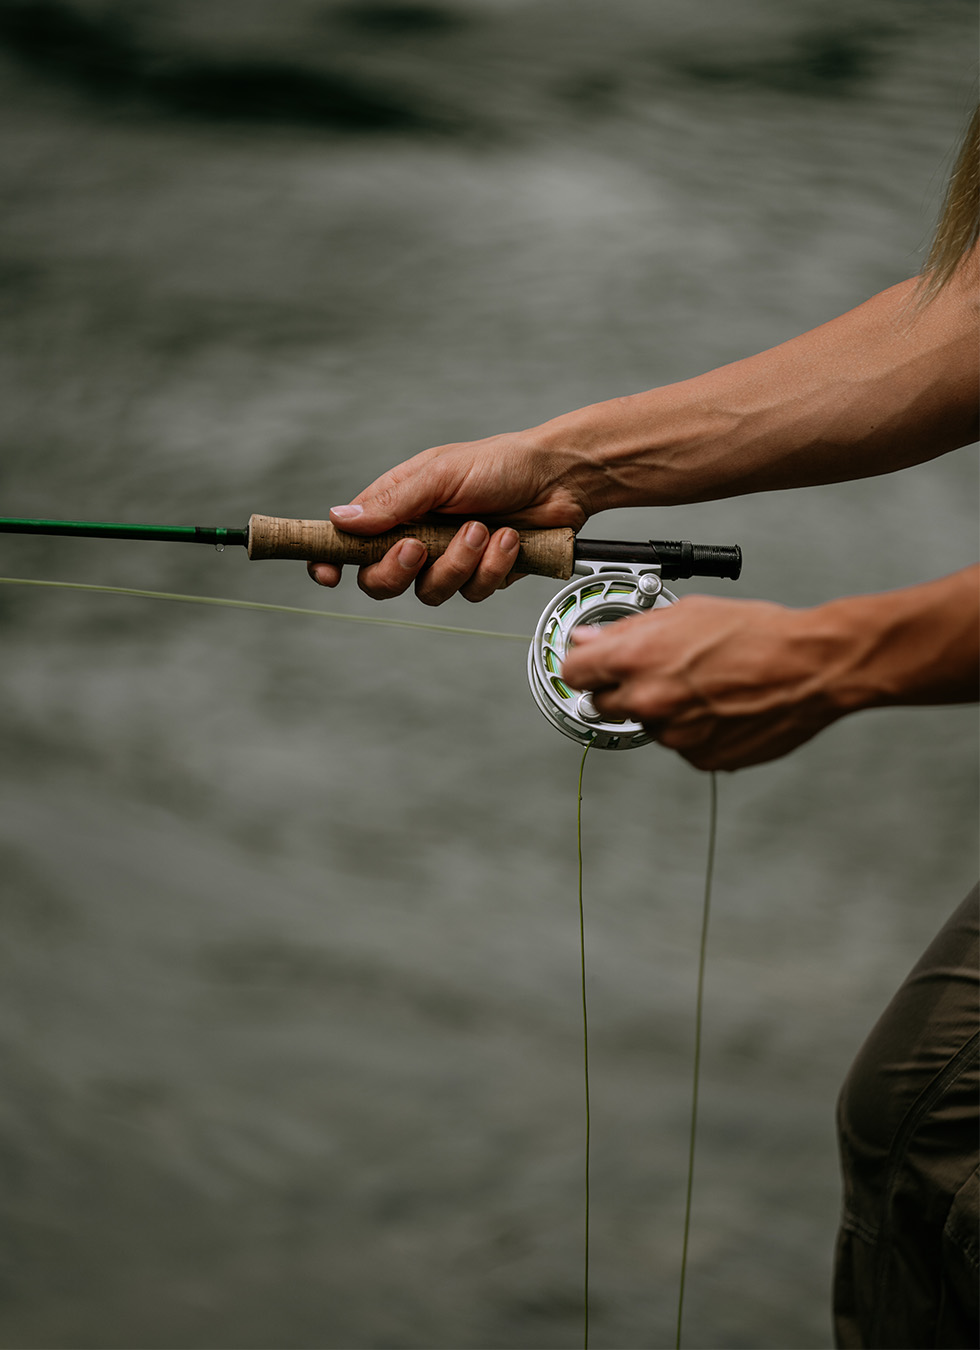 Fly Fishing 101: A Beginner's Guide to Gear and Techniques